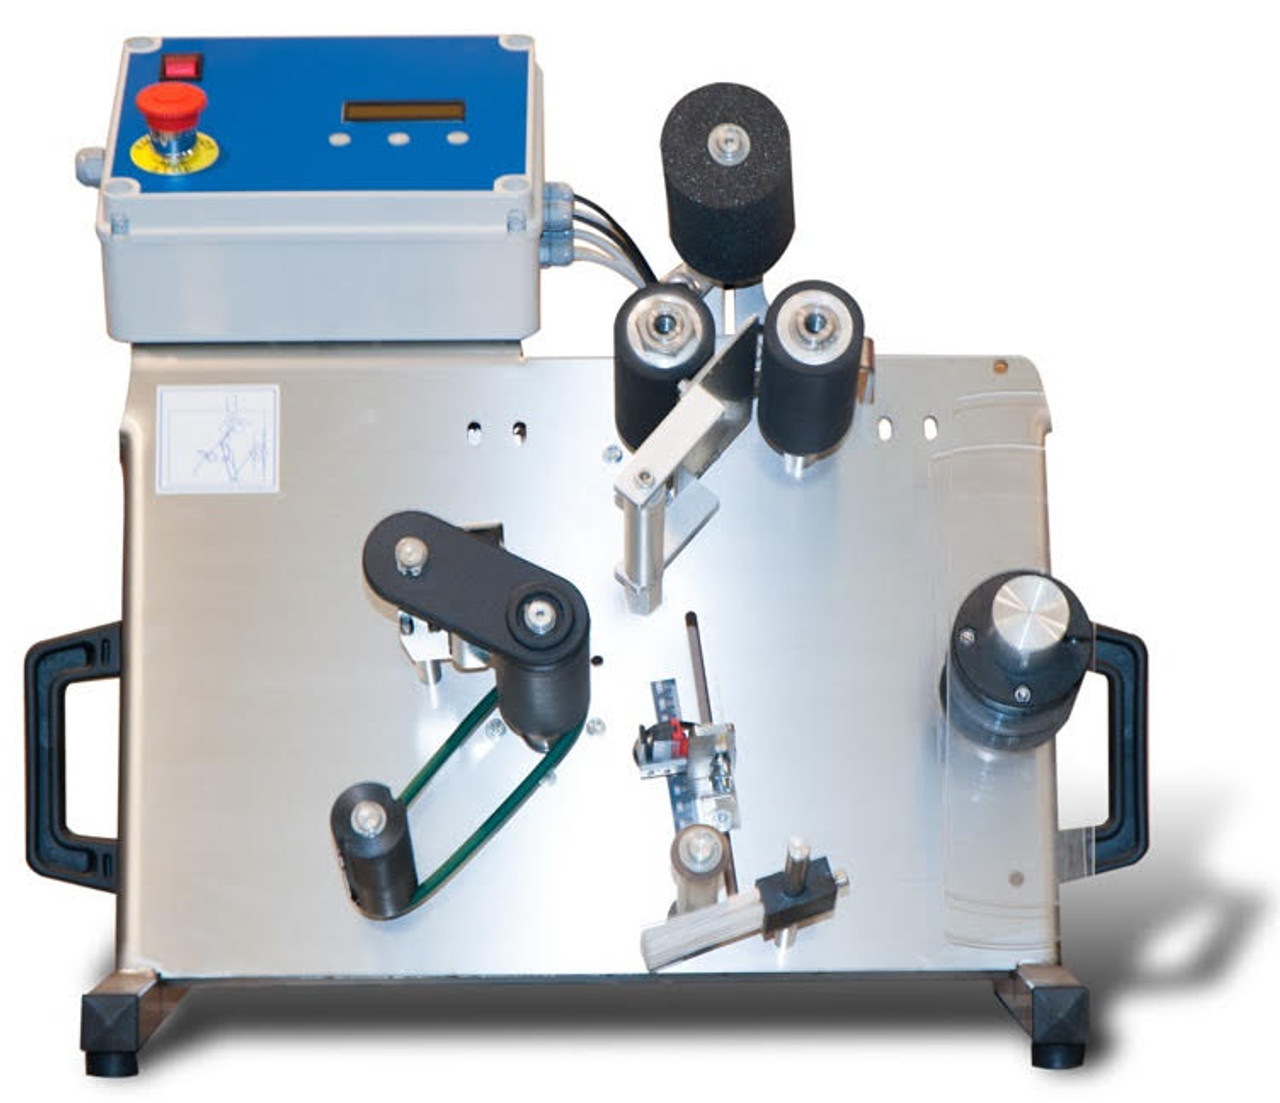 EKO-10; semi-automatic labeler suitiable for applying front/back labels from the same roll, onto glass cyndrical bottles.